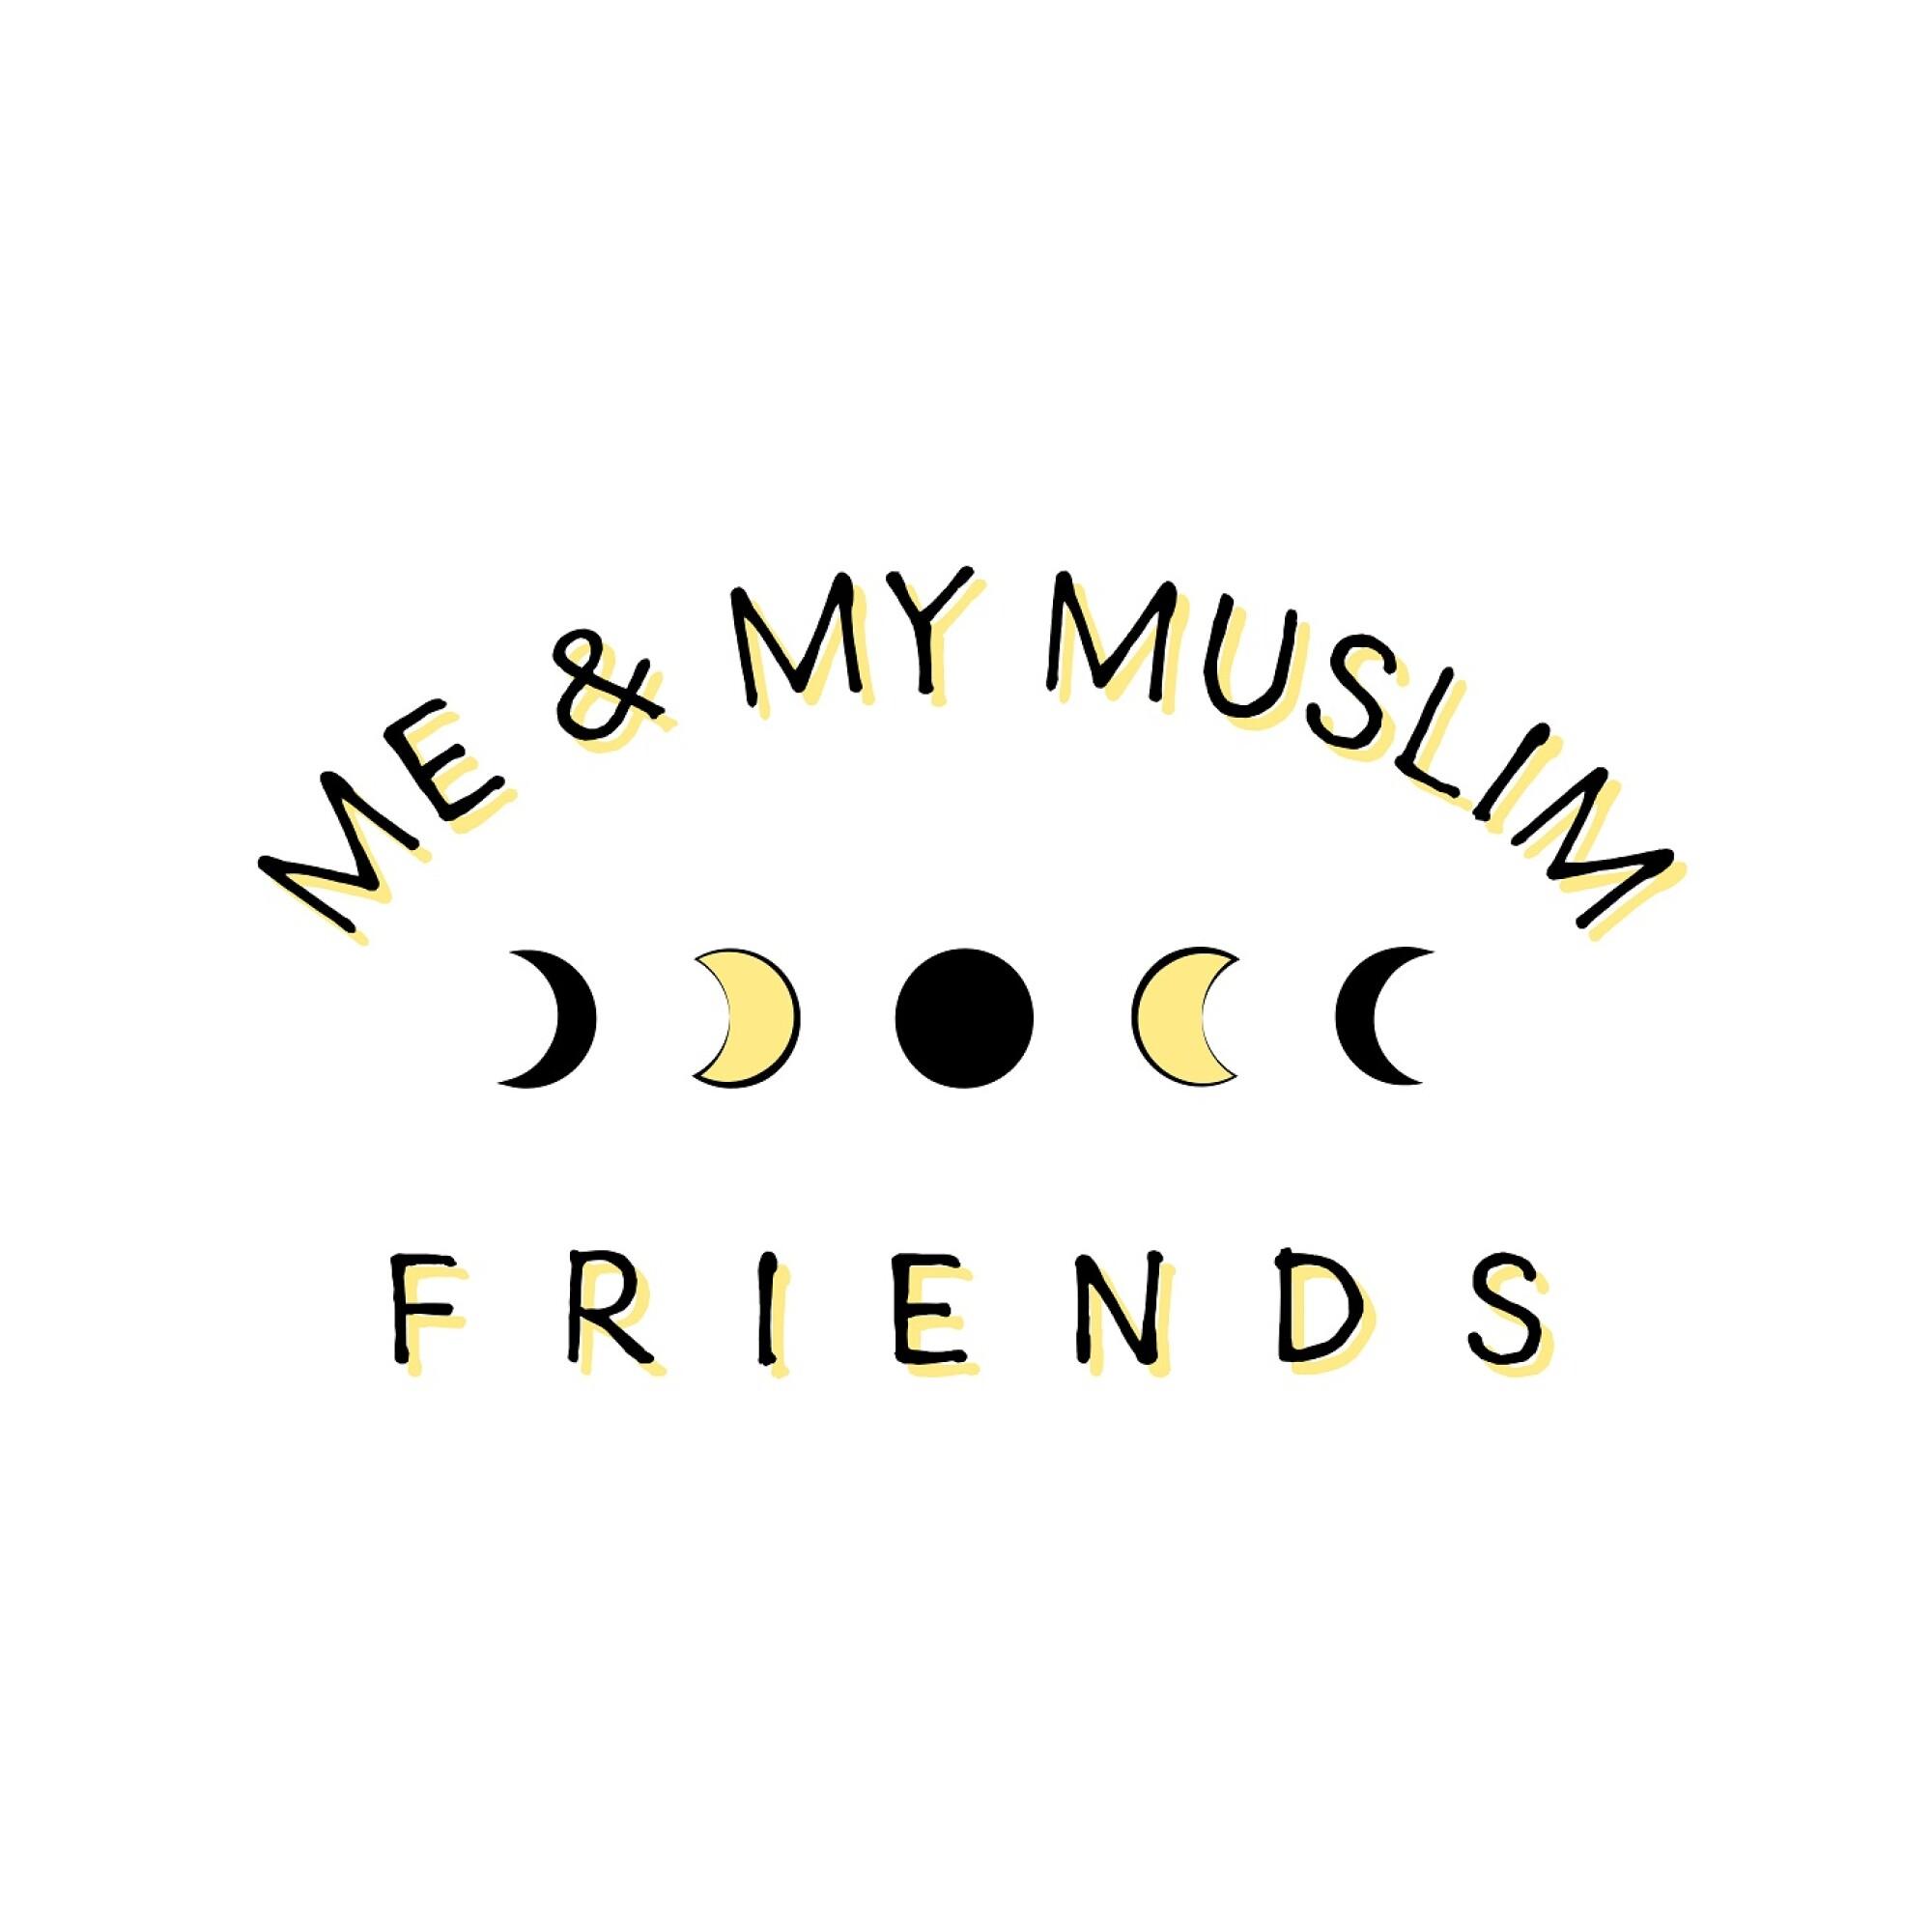 Thumbnail for "Me And My Muslim Friends: MENA, Whiteness & The U.S. Census".